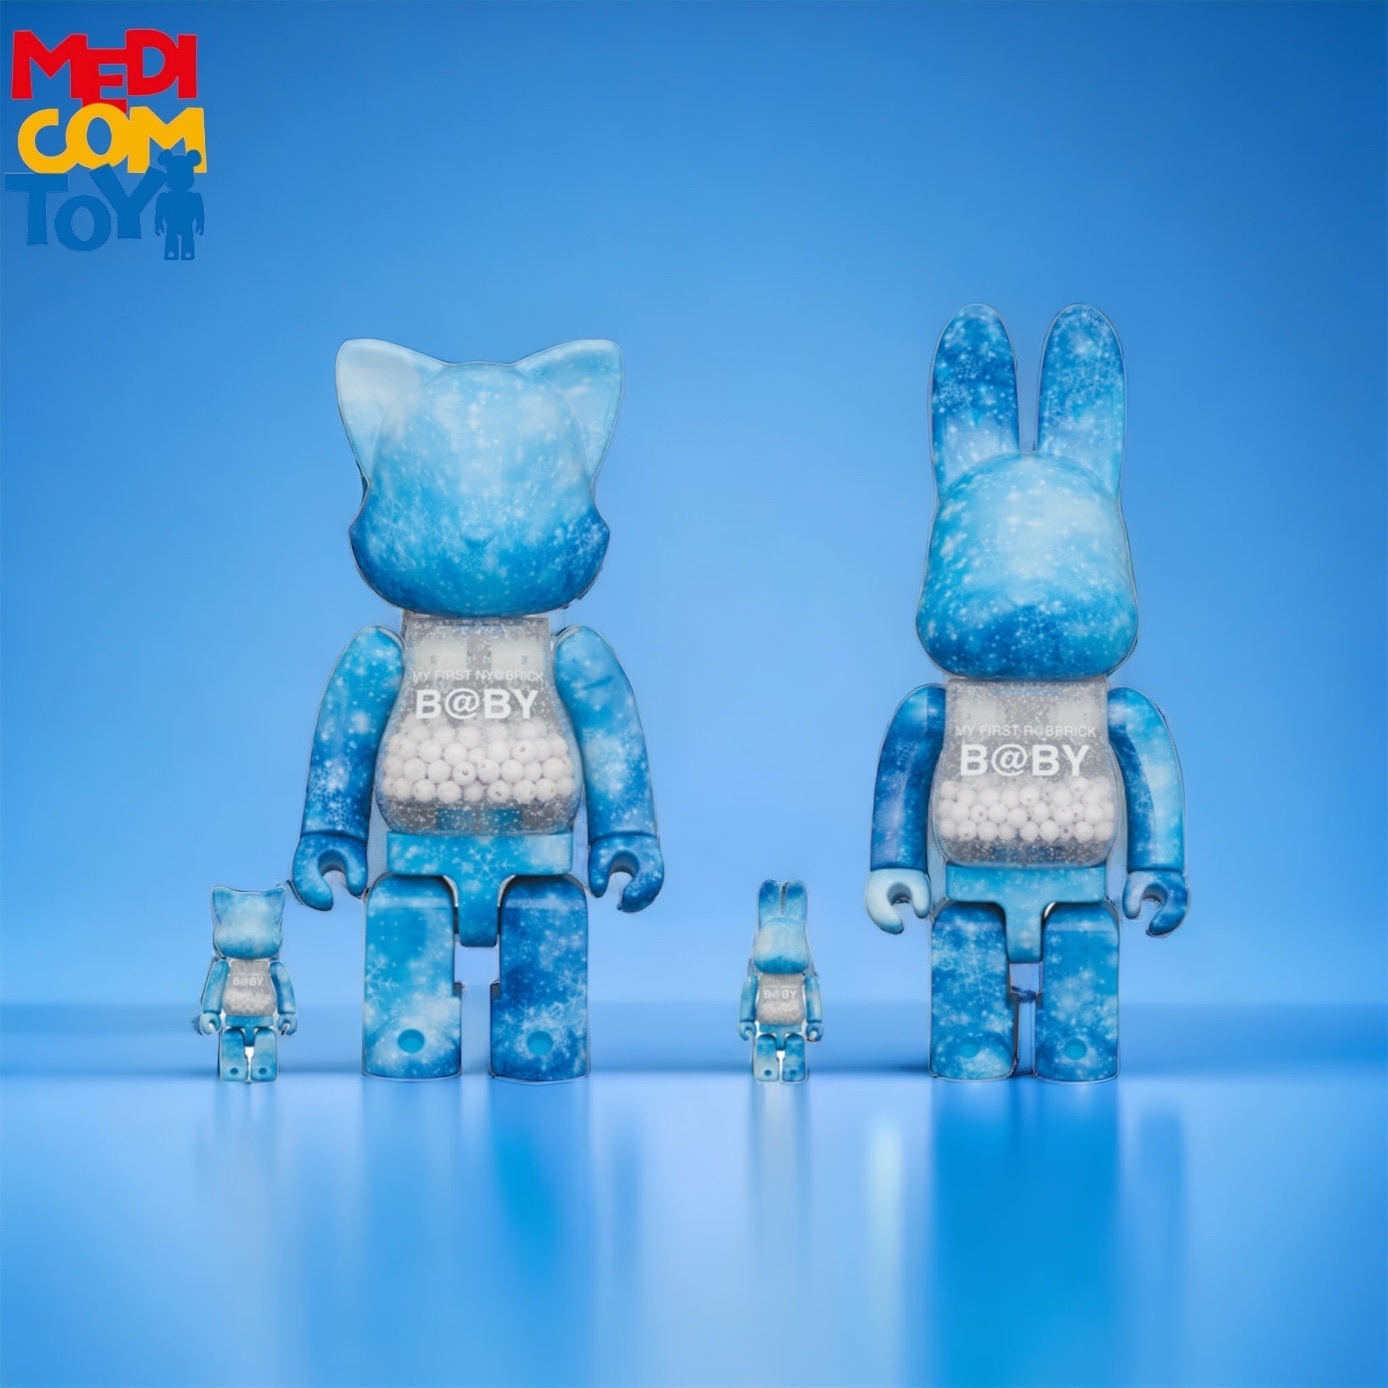 Bearbrick 400% 100% B@BY CRYSTAL OF SNOW set of 4